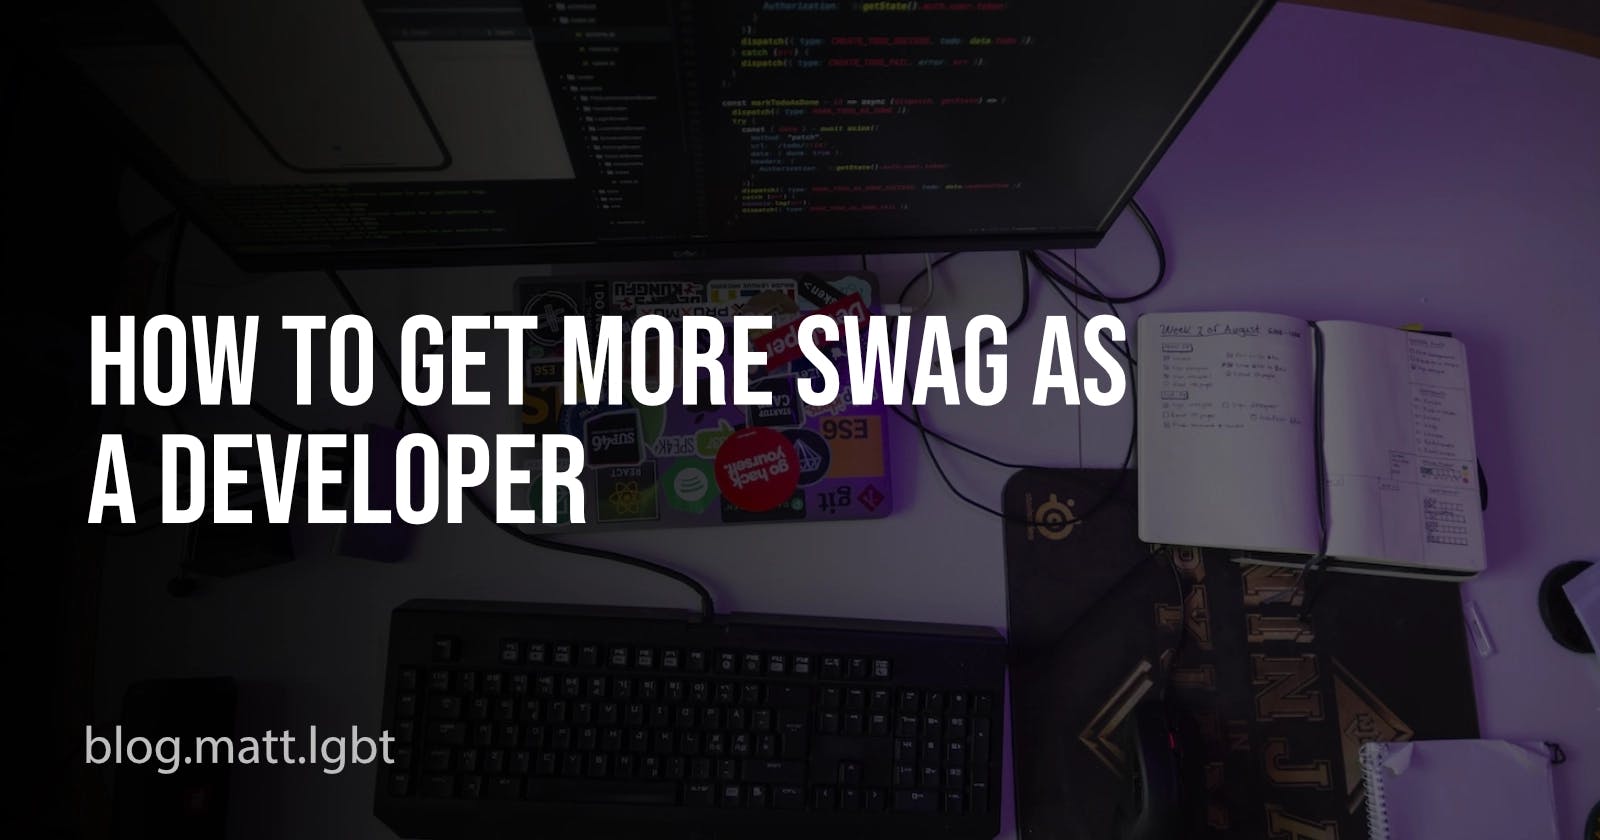 How to get more swag as a developer